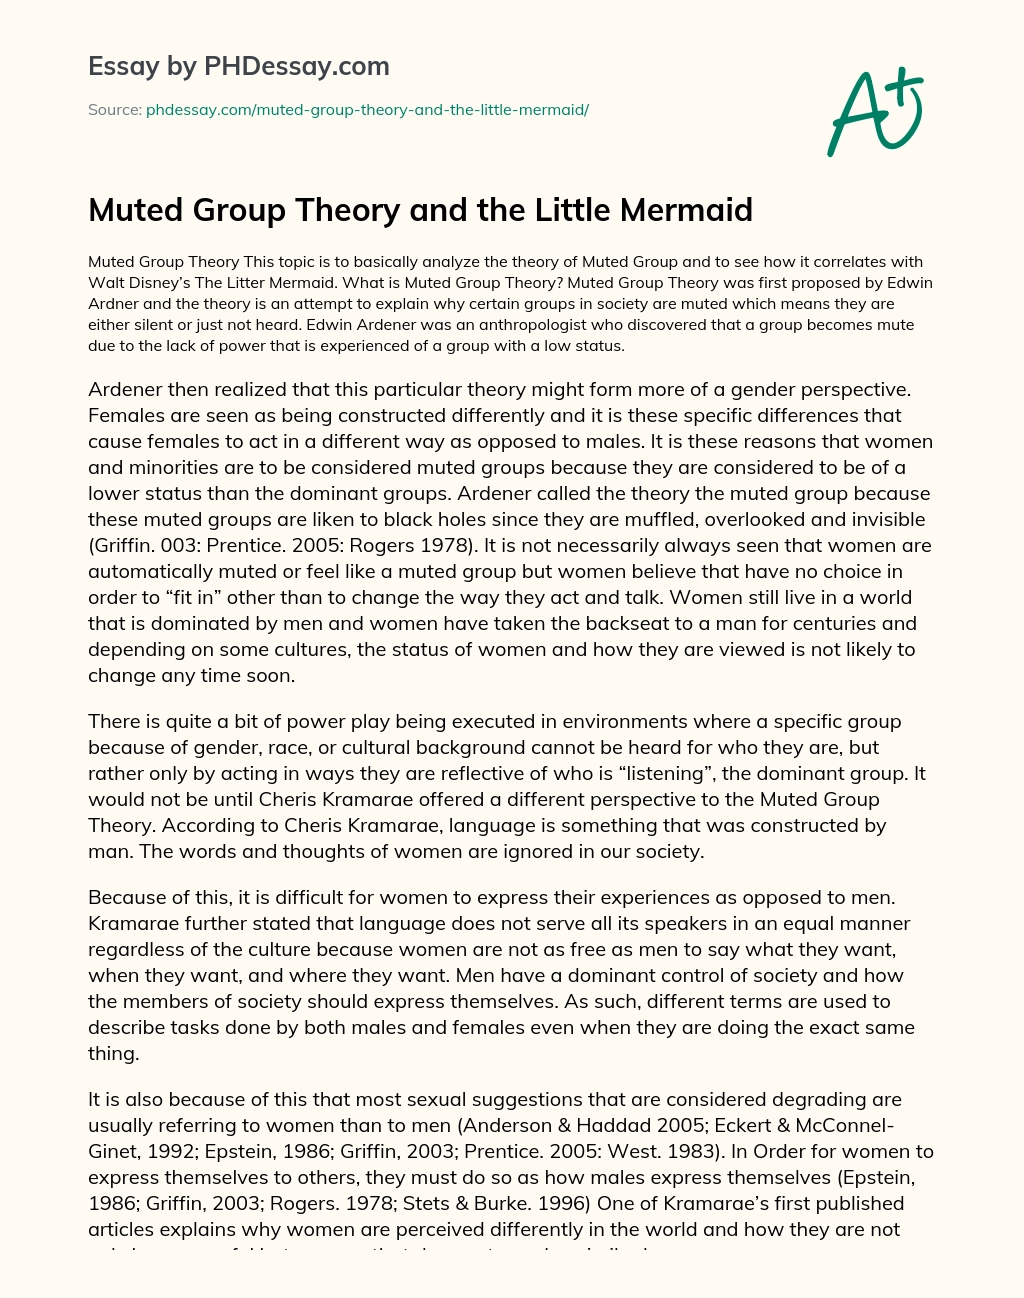 Muted Group Theory and the Little Mermaid essay